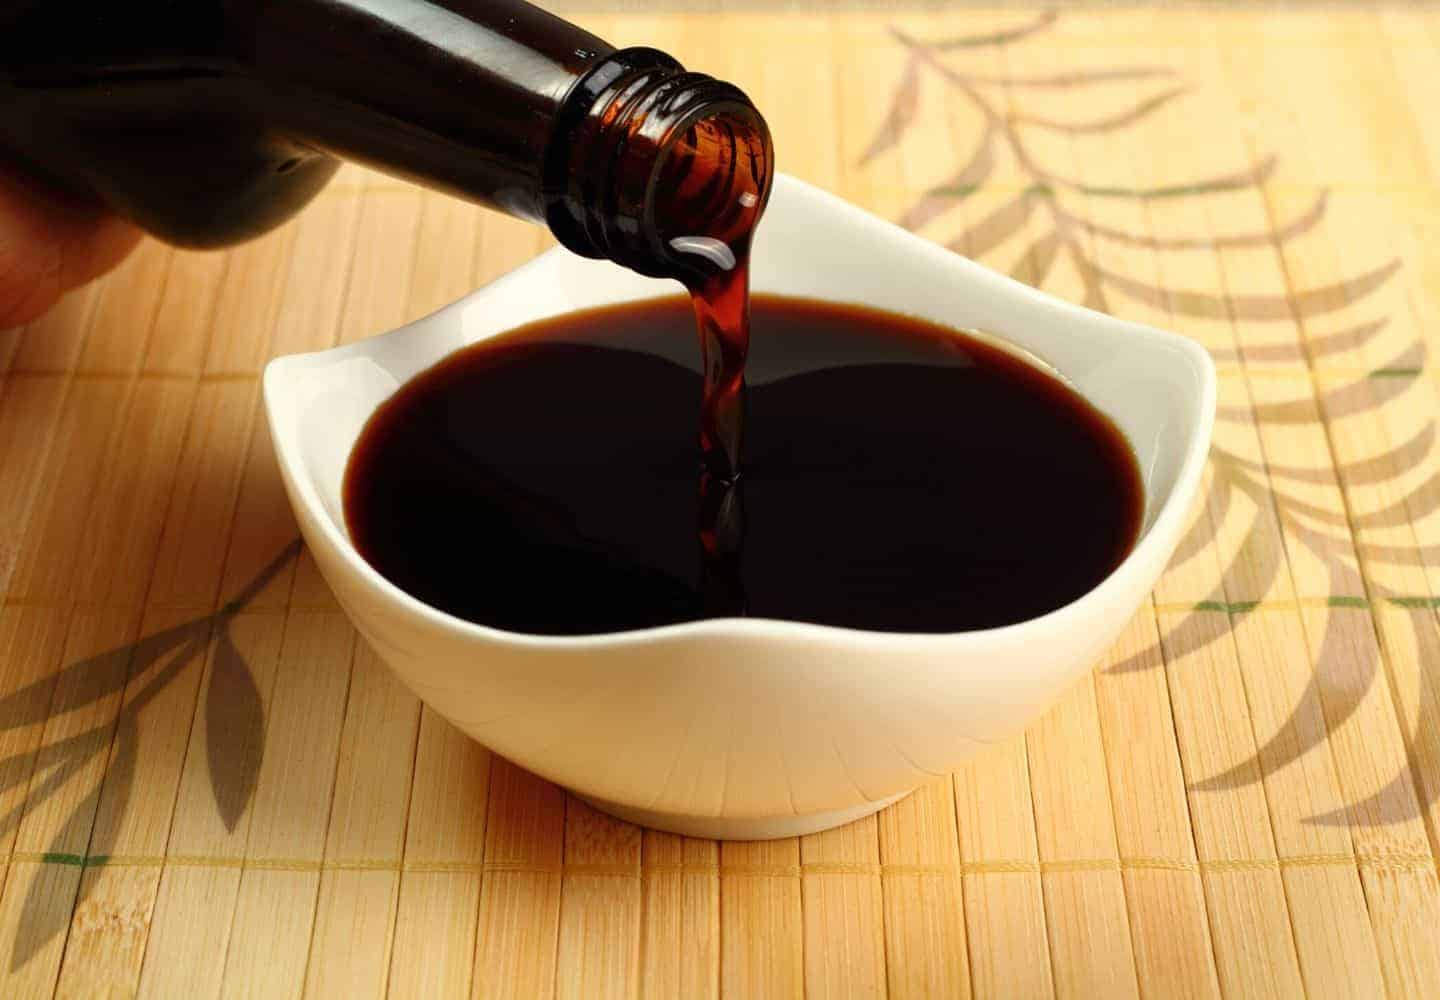 Soy sauce being poured out into a small dish